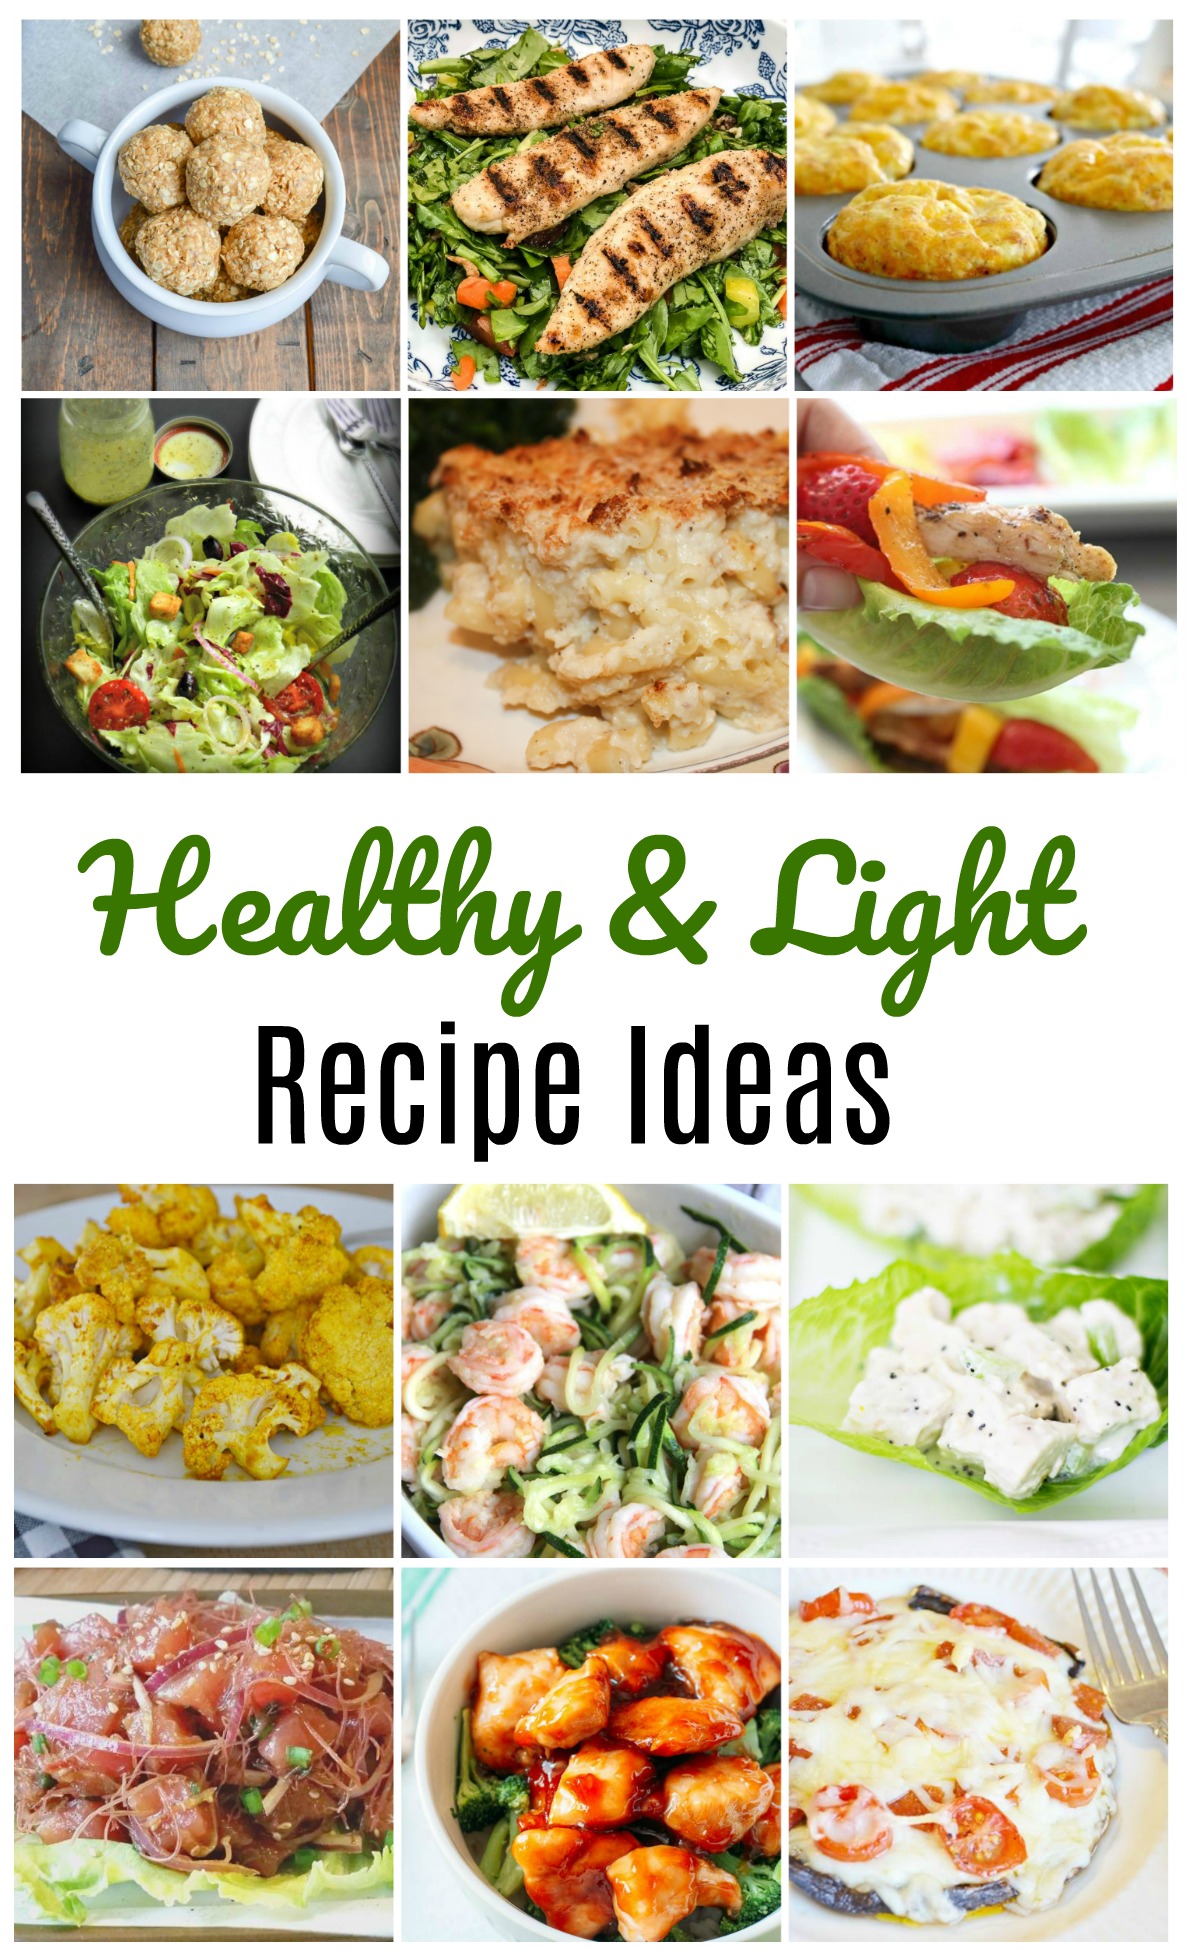 Healthy and Light Recipe Ideas - Sweet